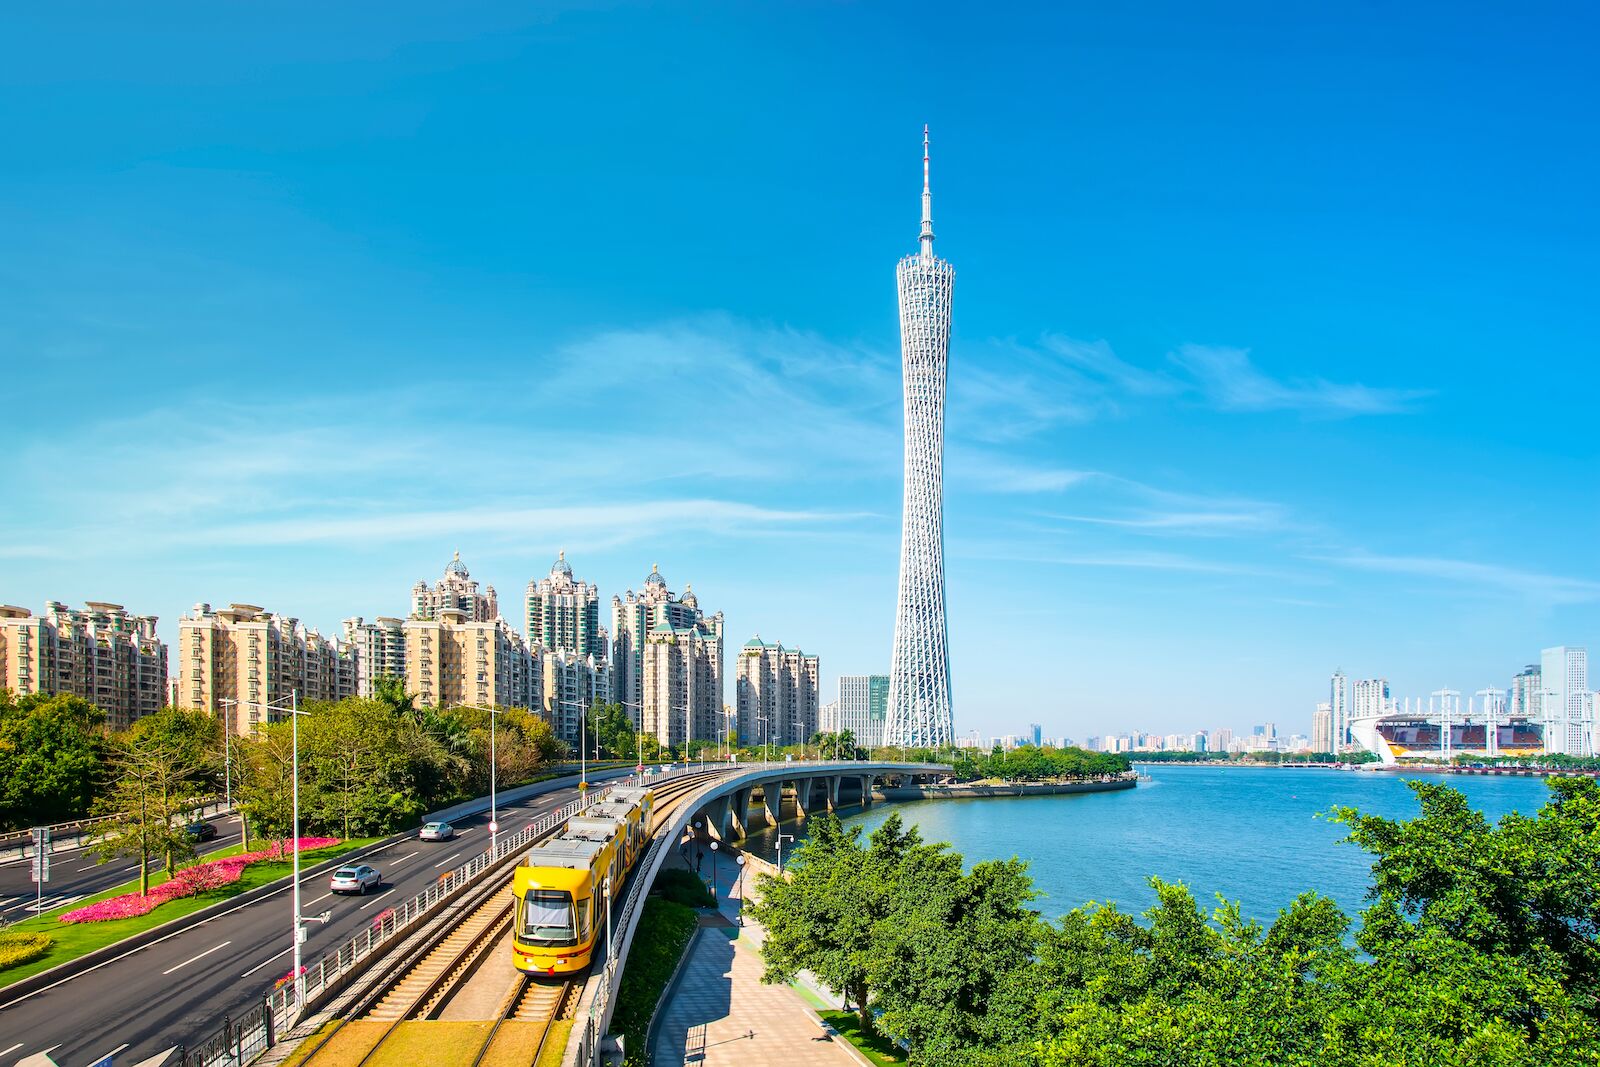 View of the city of Guangzhou and its architecture. Guangzhou is one of the largest cities in China.